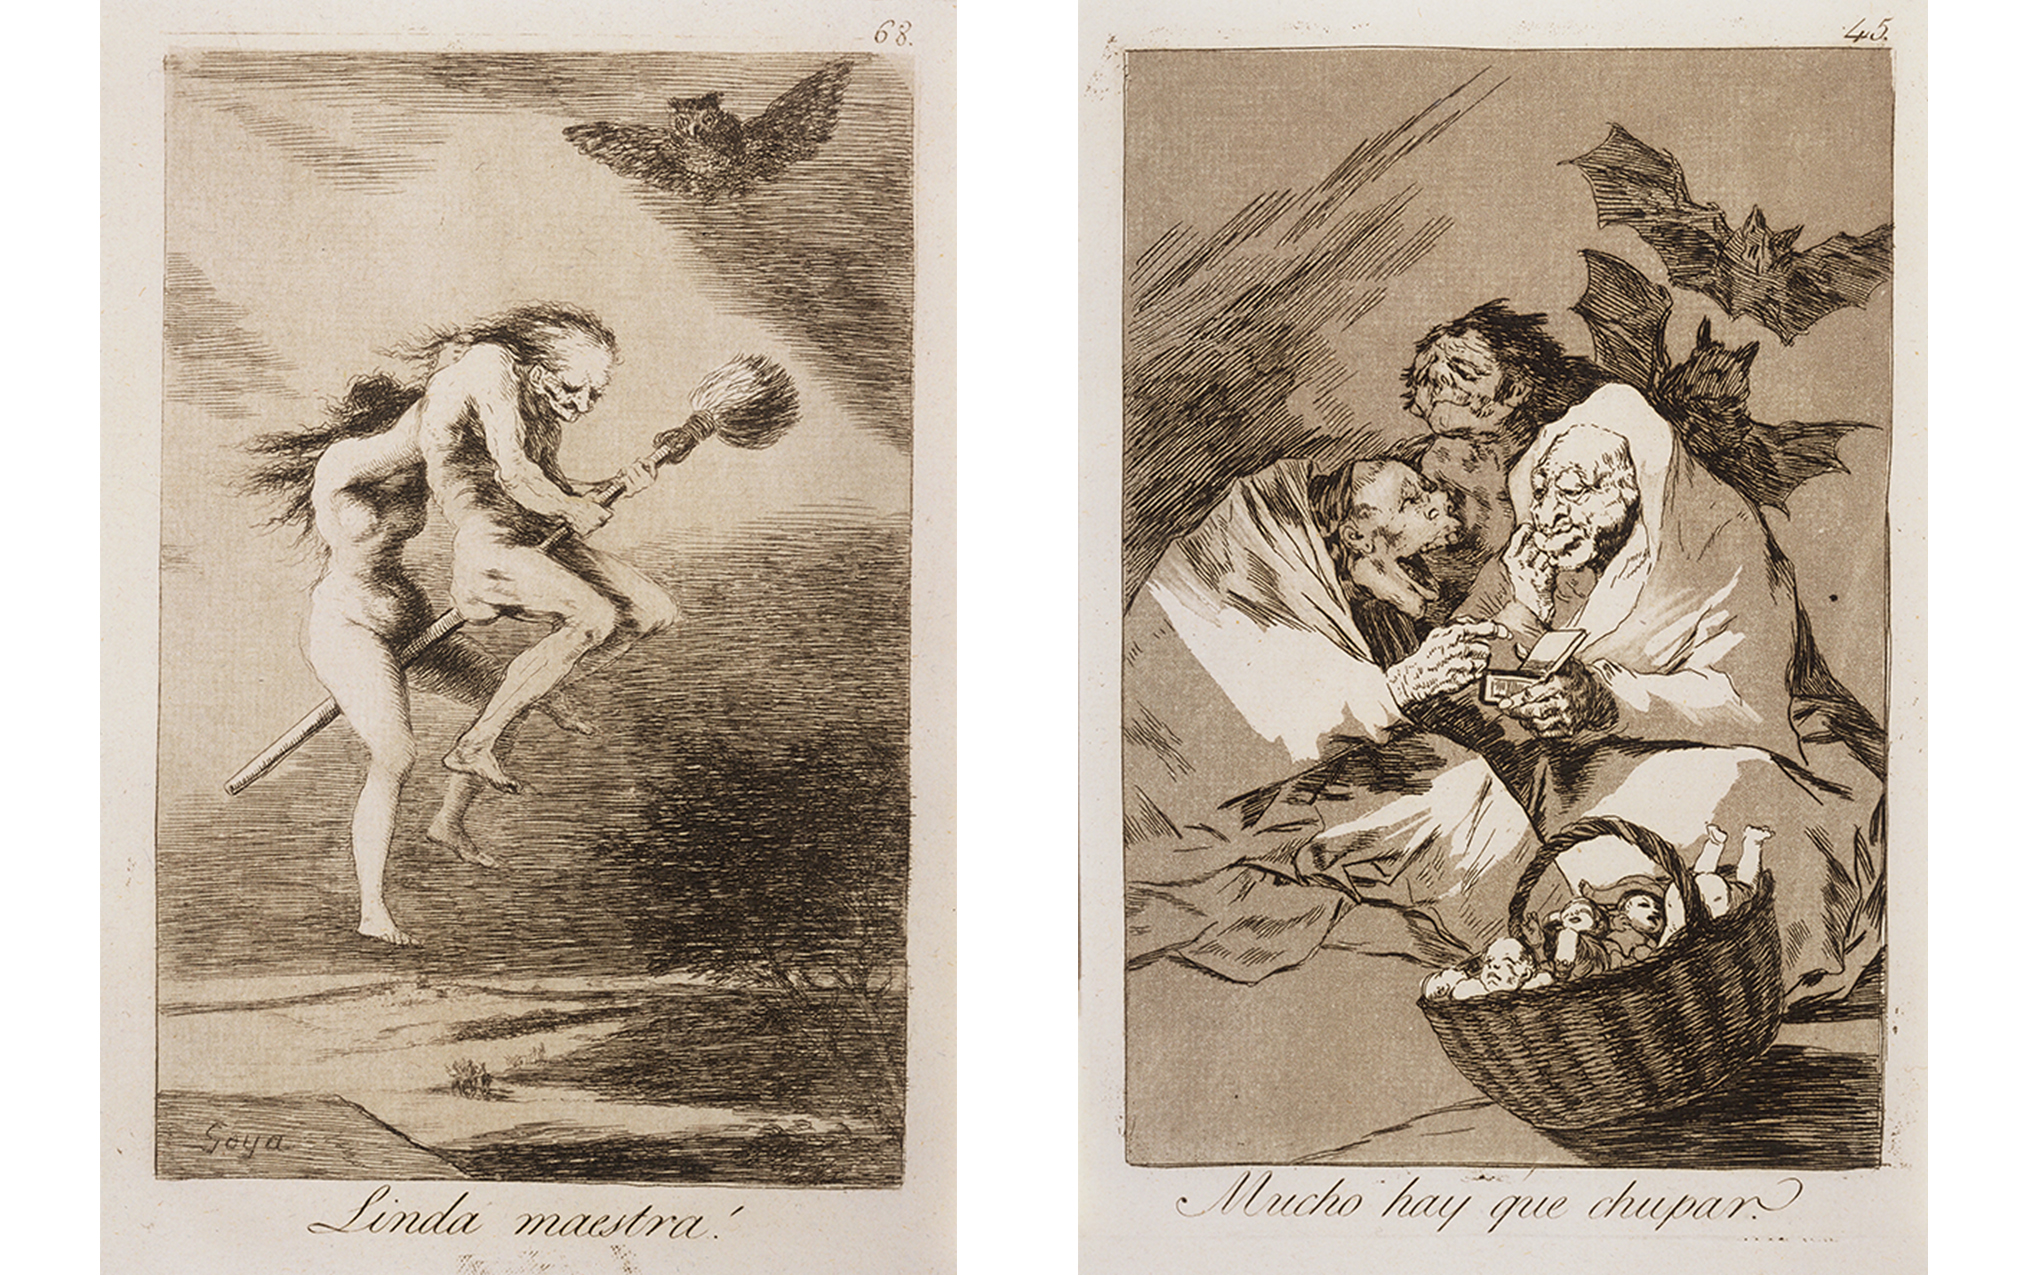 left: undressed young and elderly women riding a broom, a black owl is on the right. right:  two witches sit with a basket of babies at their feet, man stands while two bats fly overhead behind them